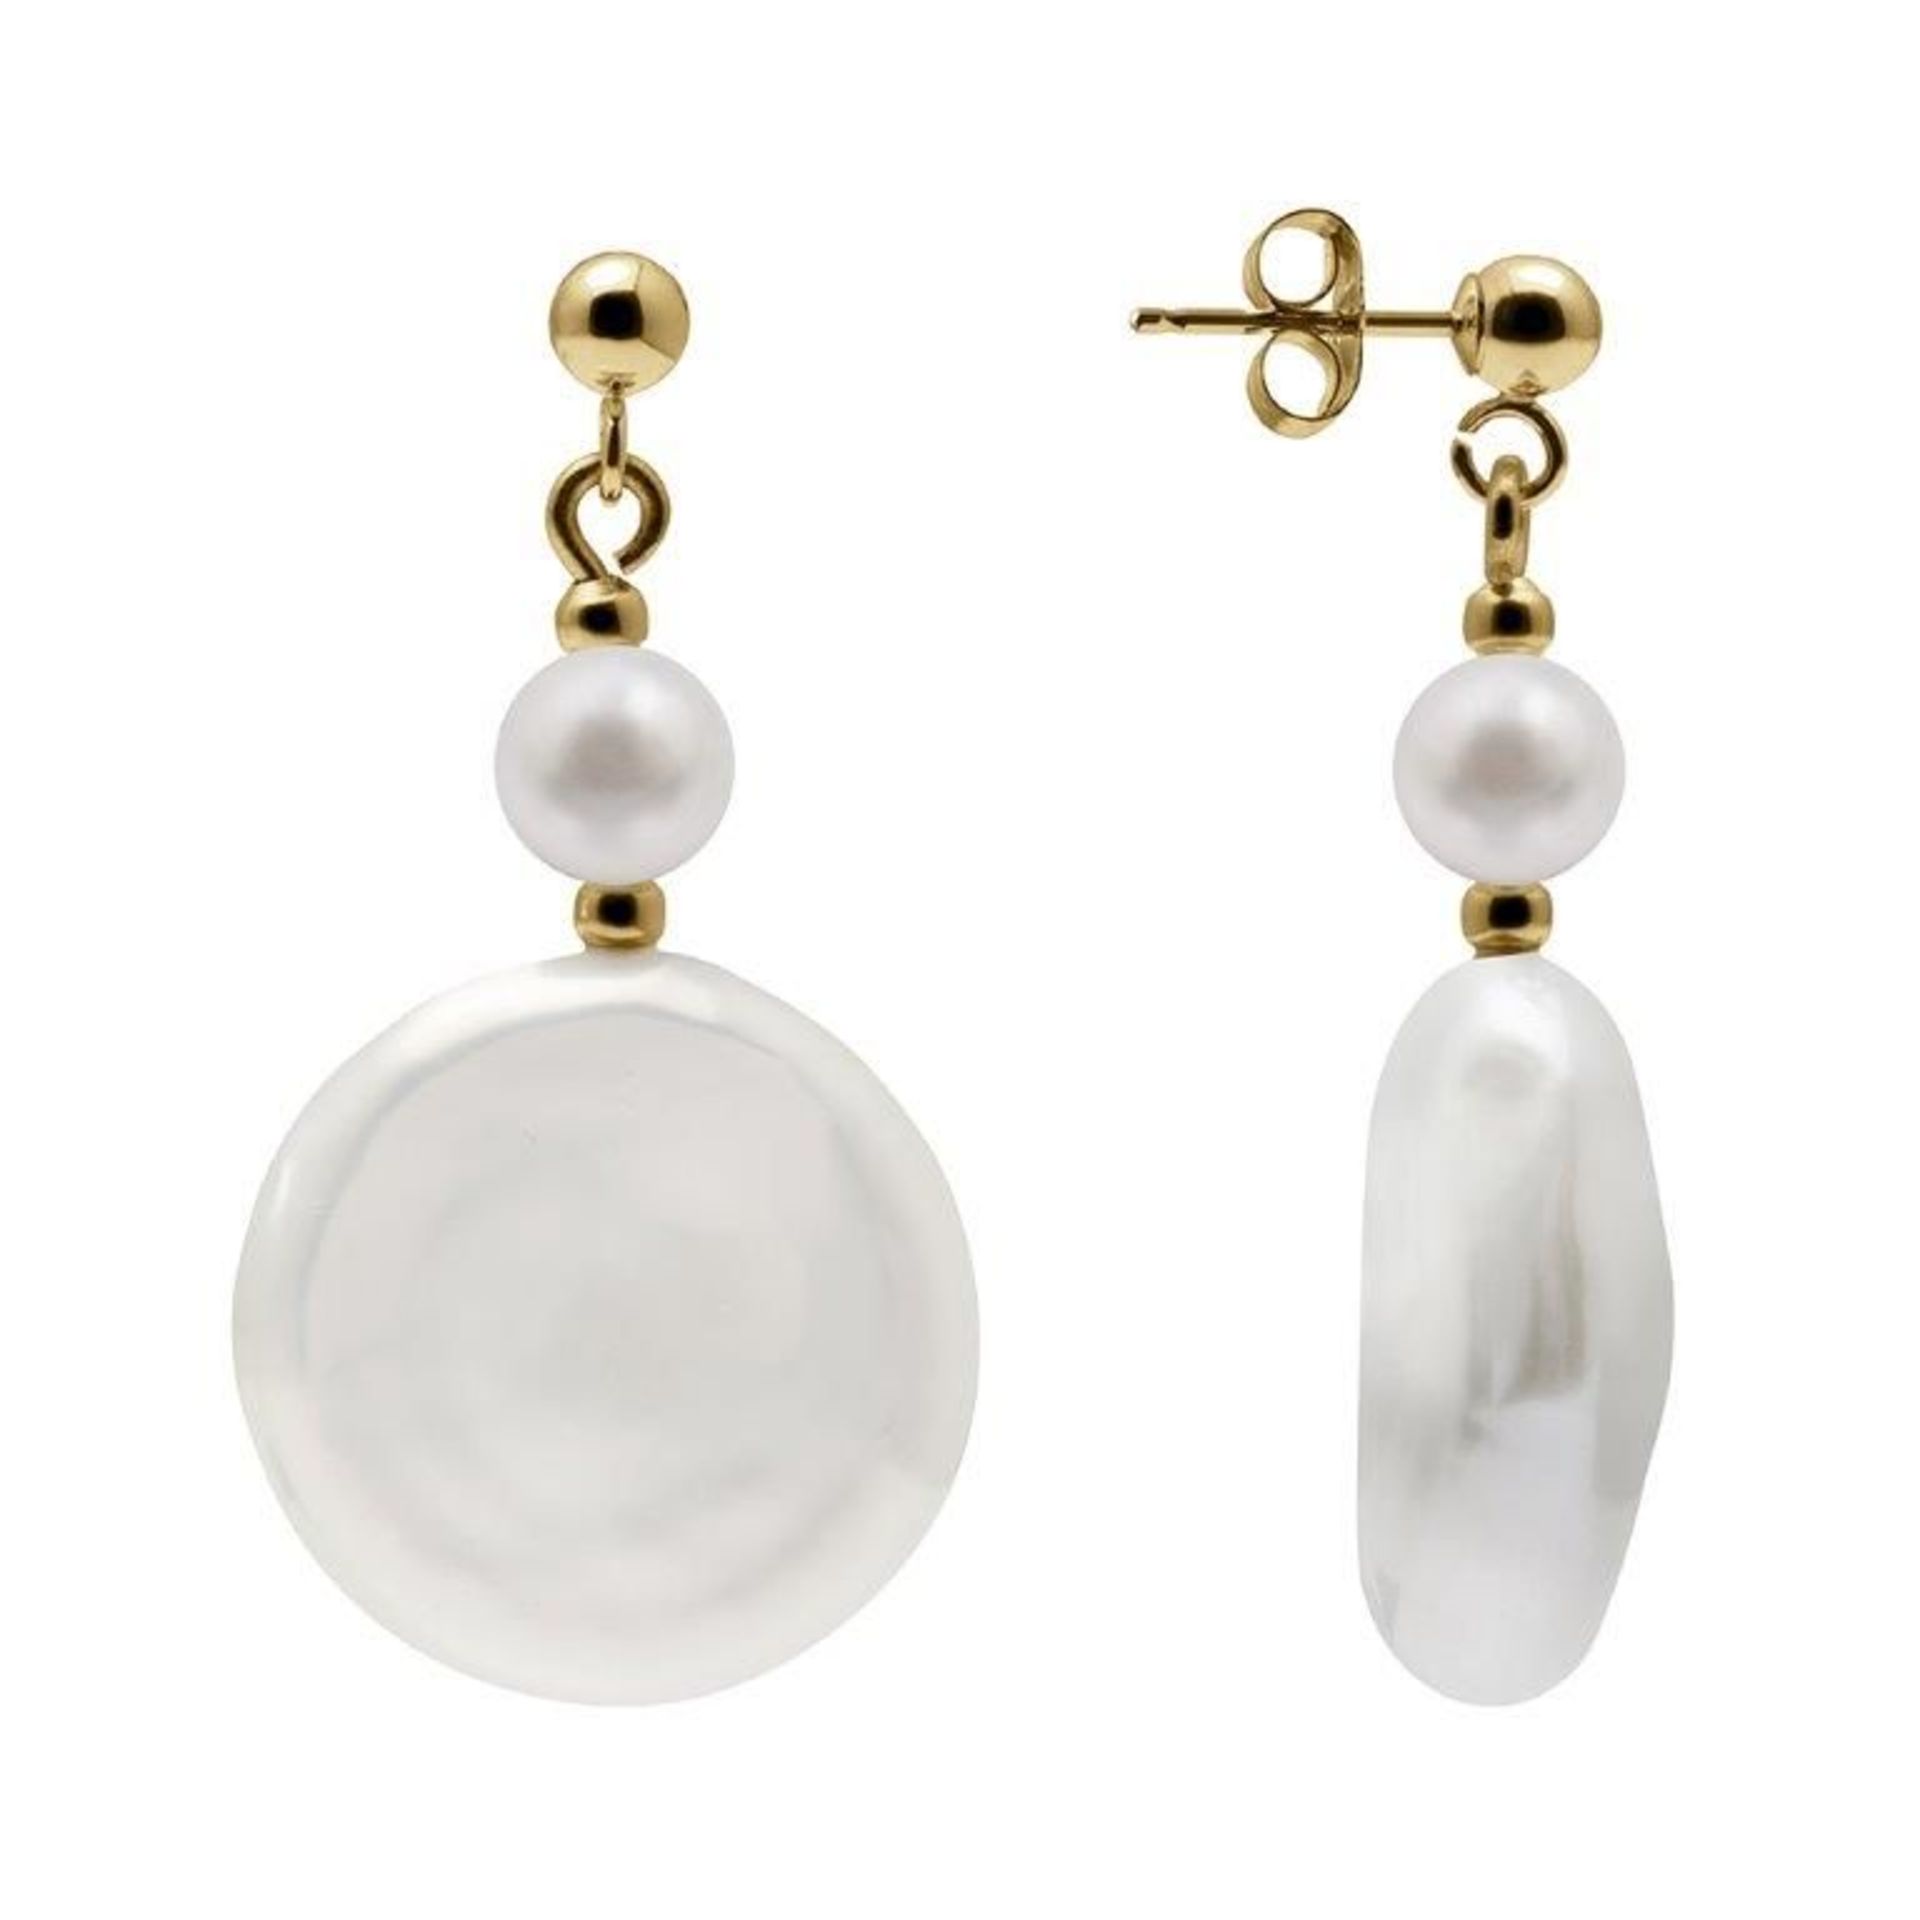 9ct Yellow Gold 13mm Coin Pearl Drop Earrings RRP £255